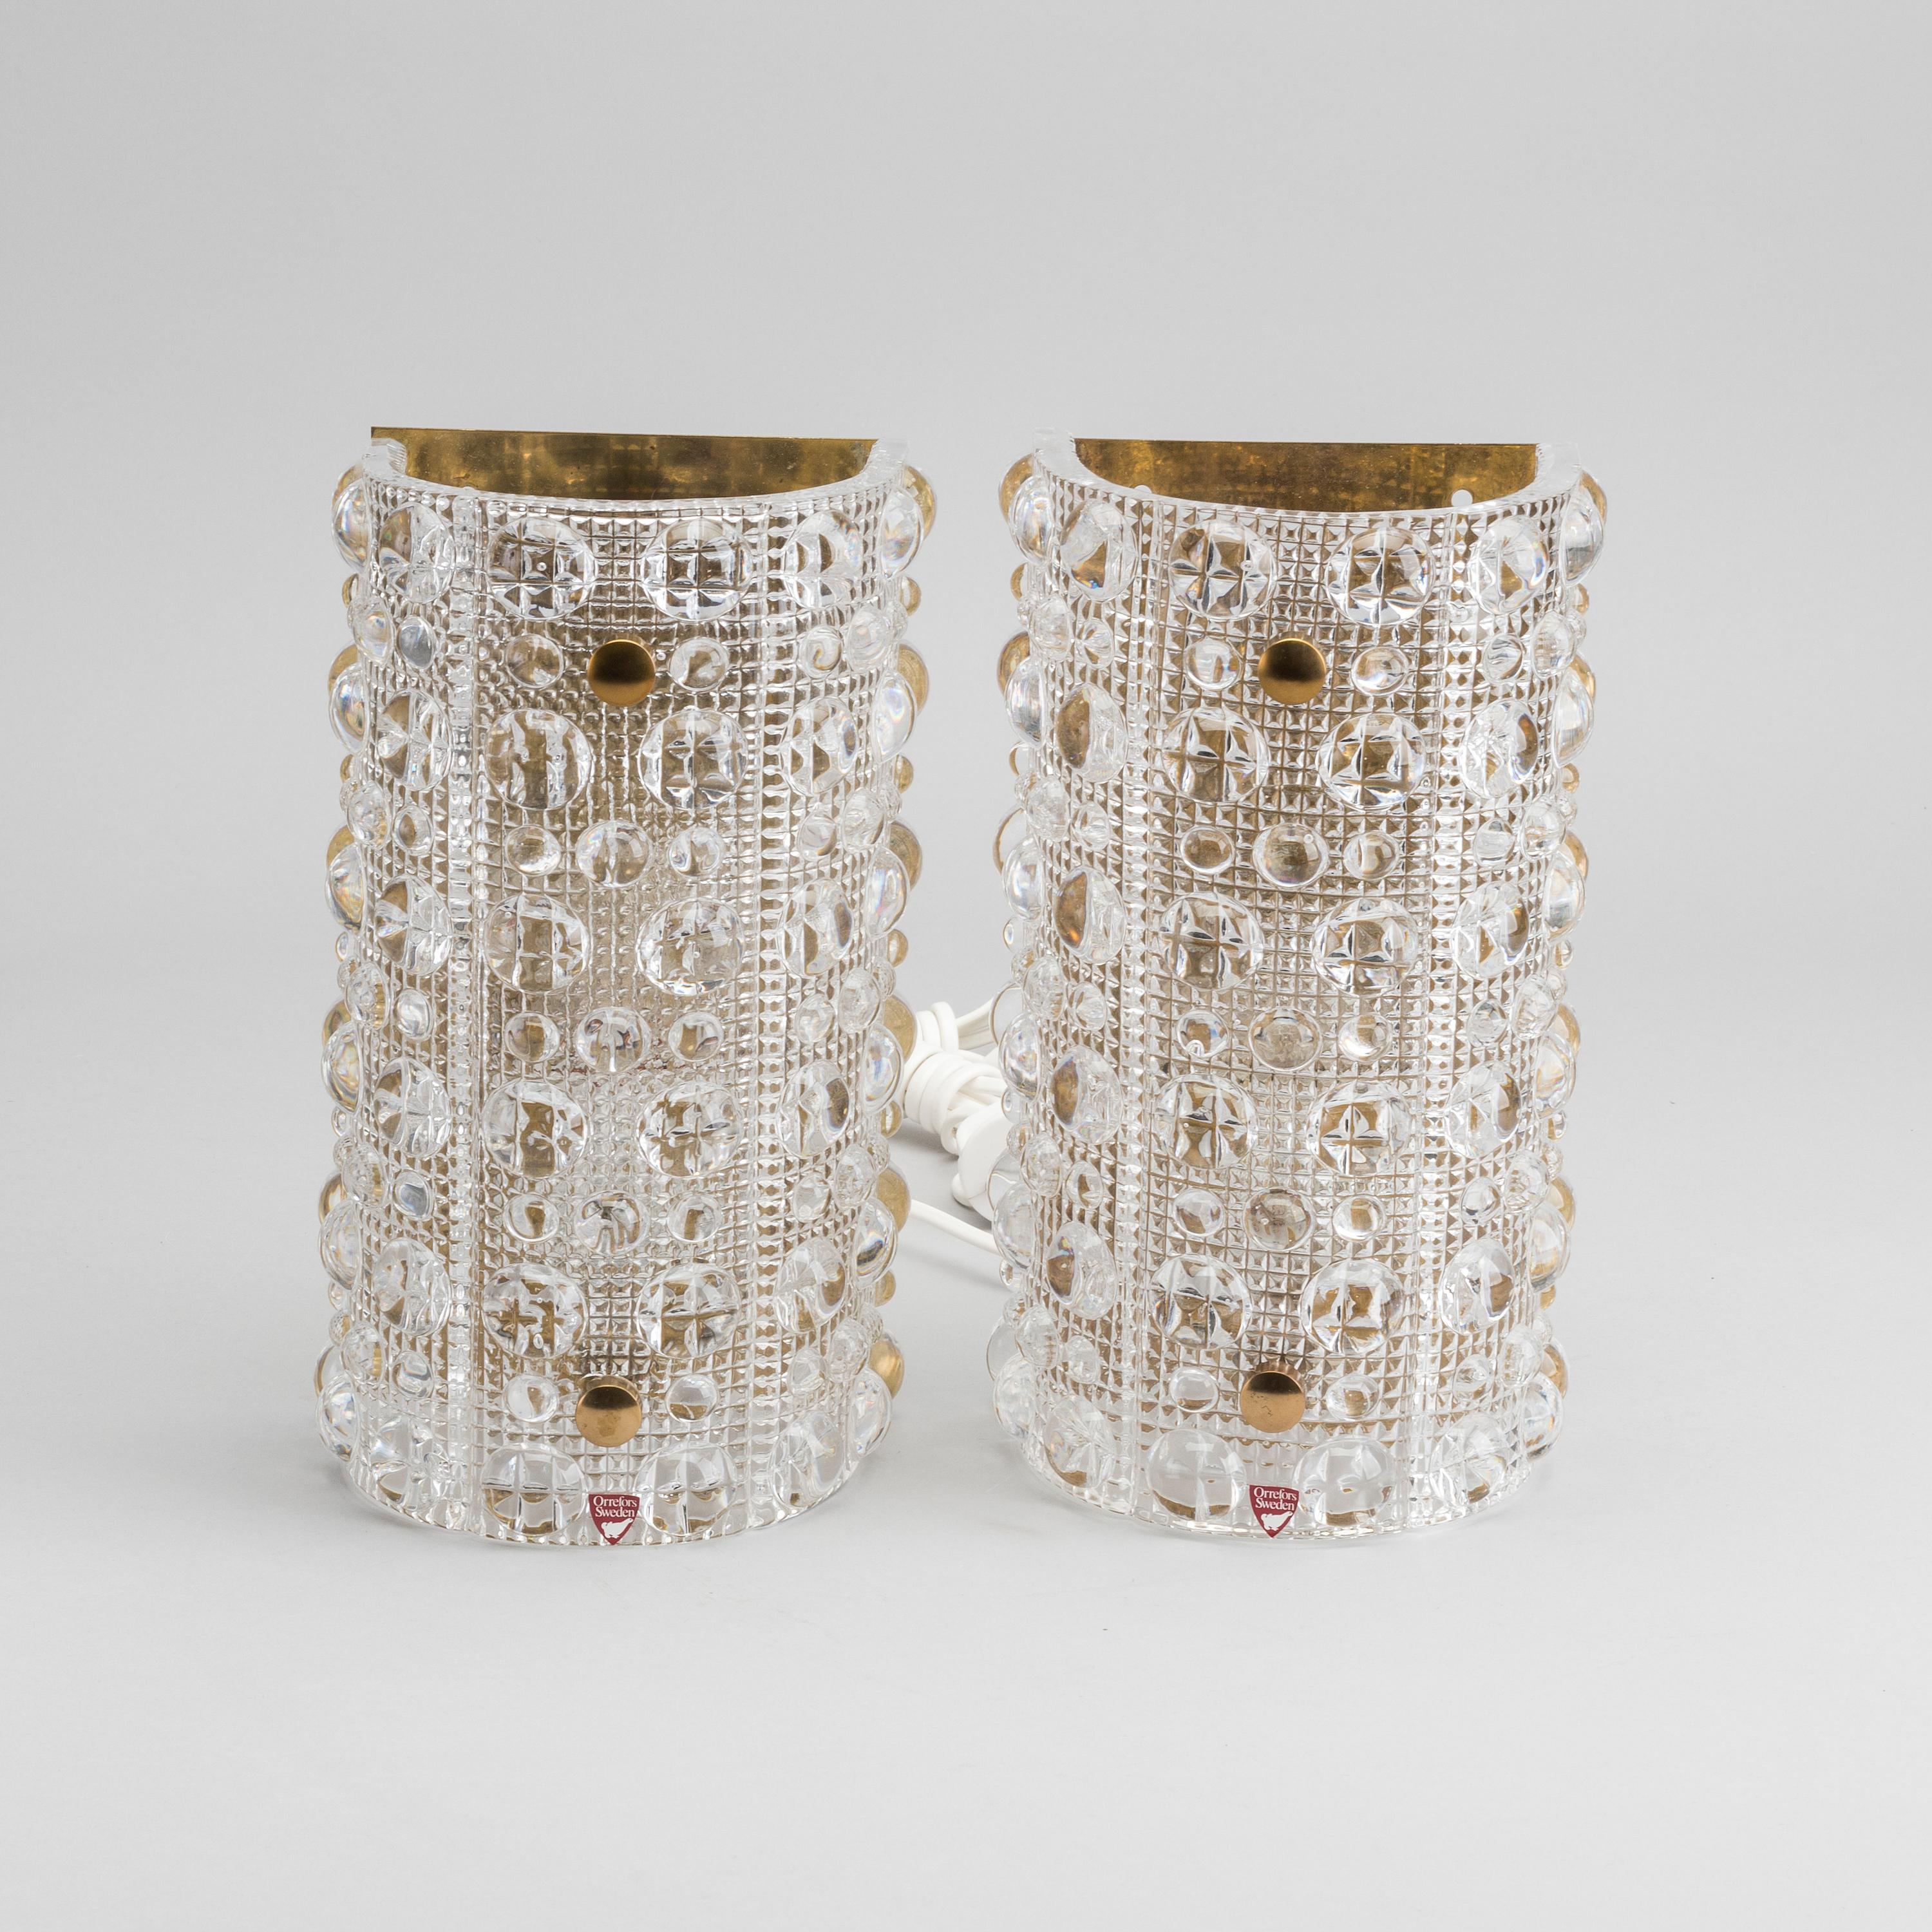 Carl Fagerlund Pair of Large Brass and Glass Wall Sconces for Swedish Orrefors (Schwedisch)